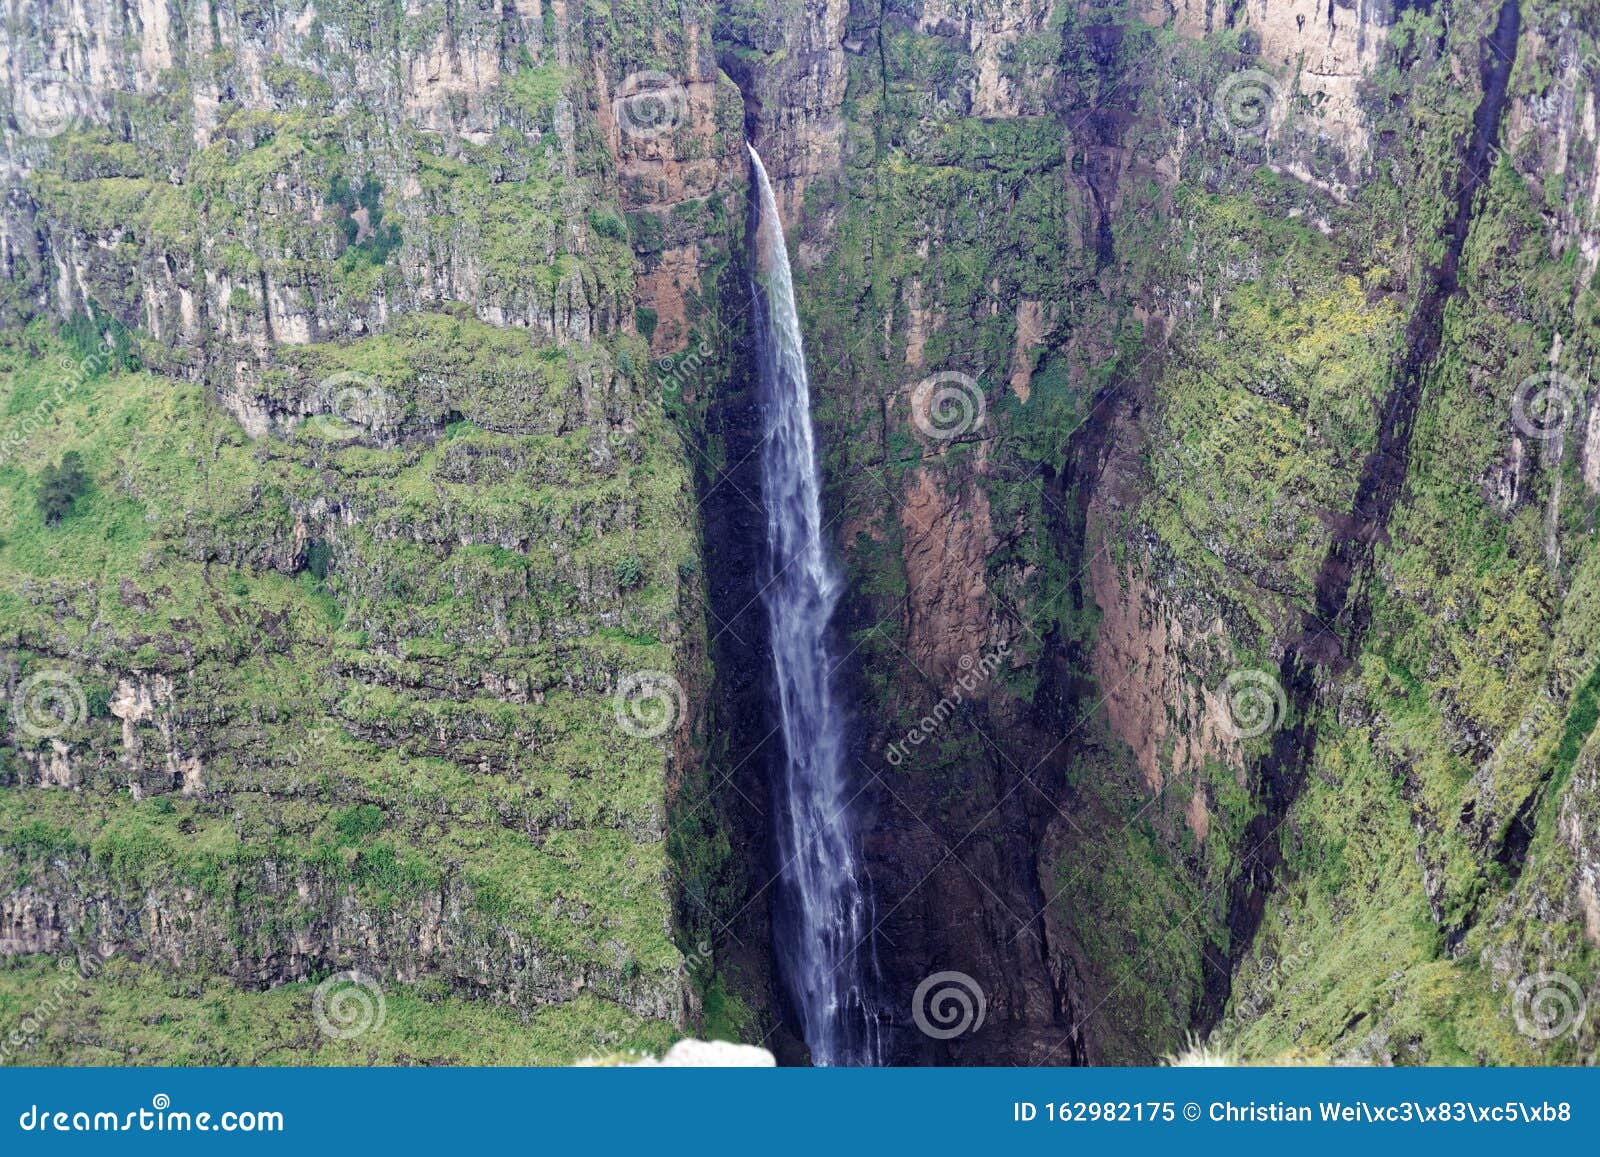 the jin bahir waterfall in the geech abyss canon in the simien mountains in ethiopia